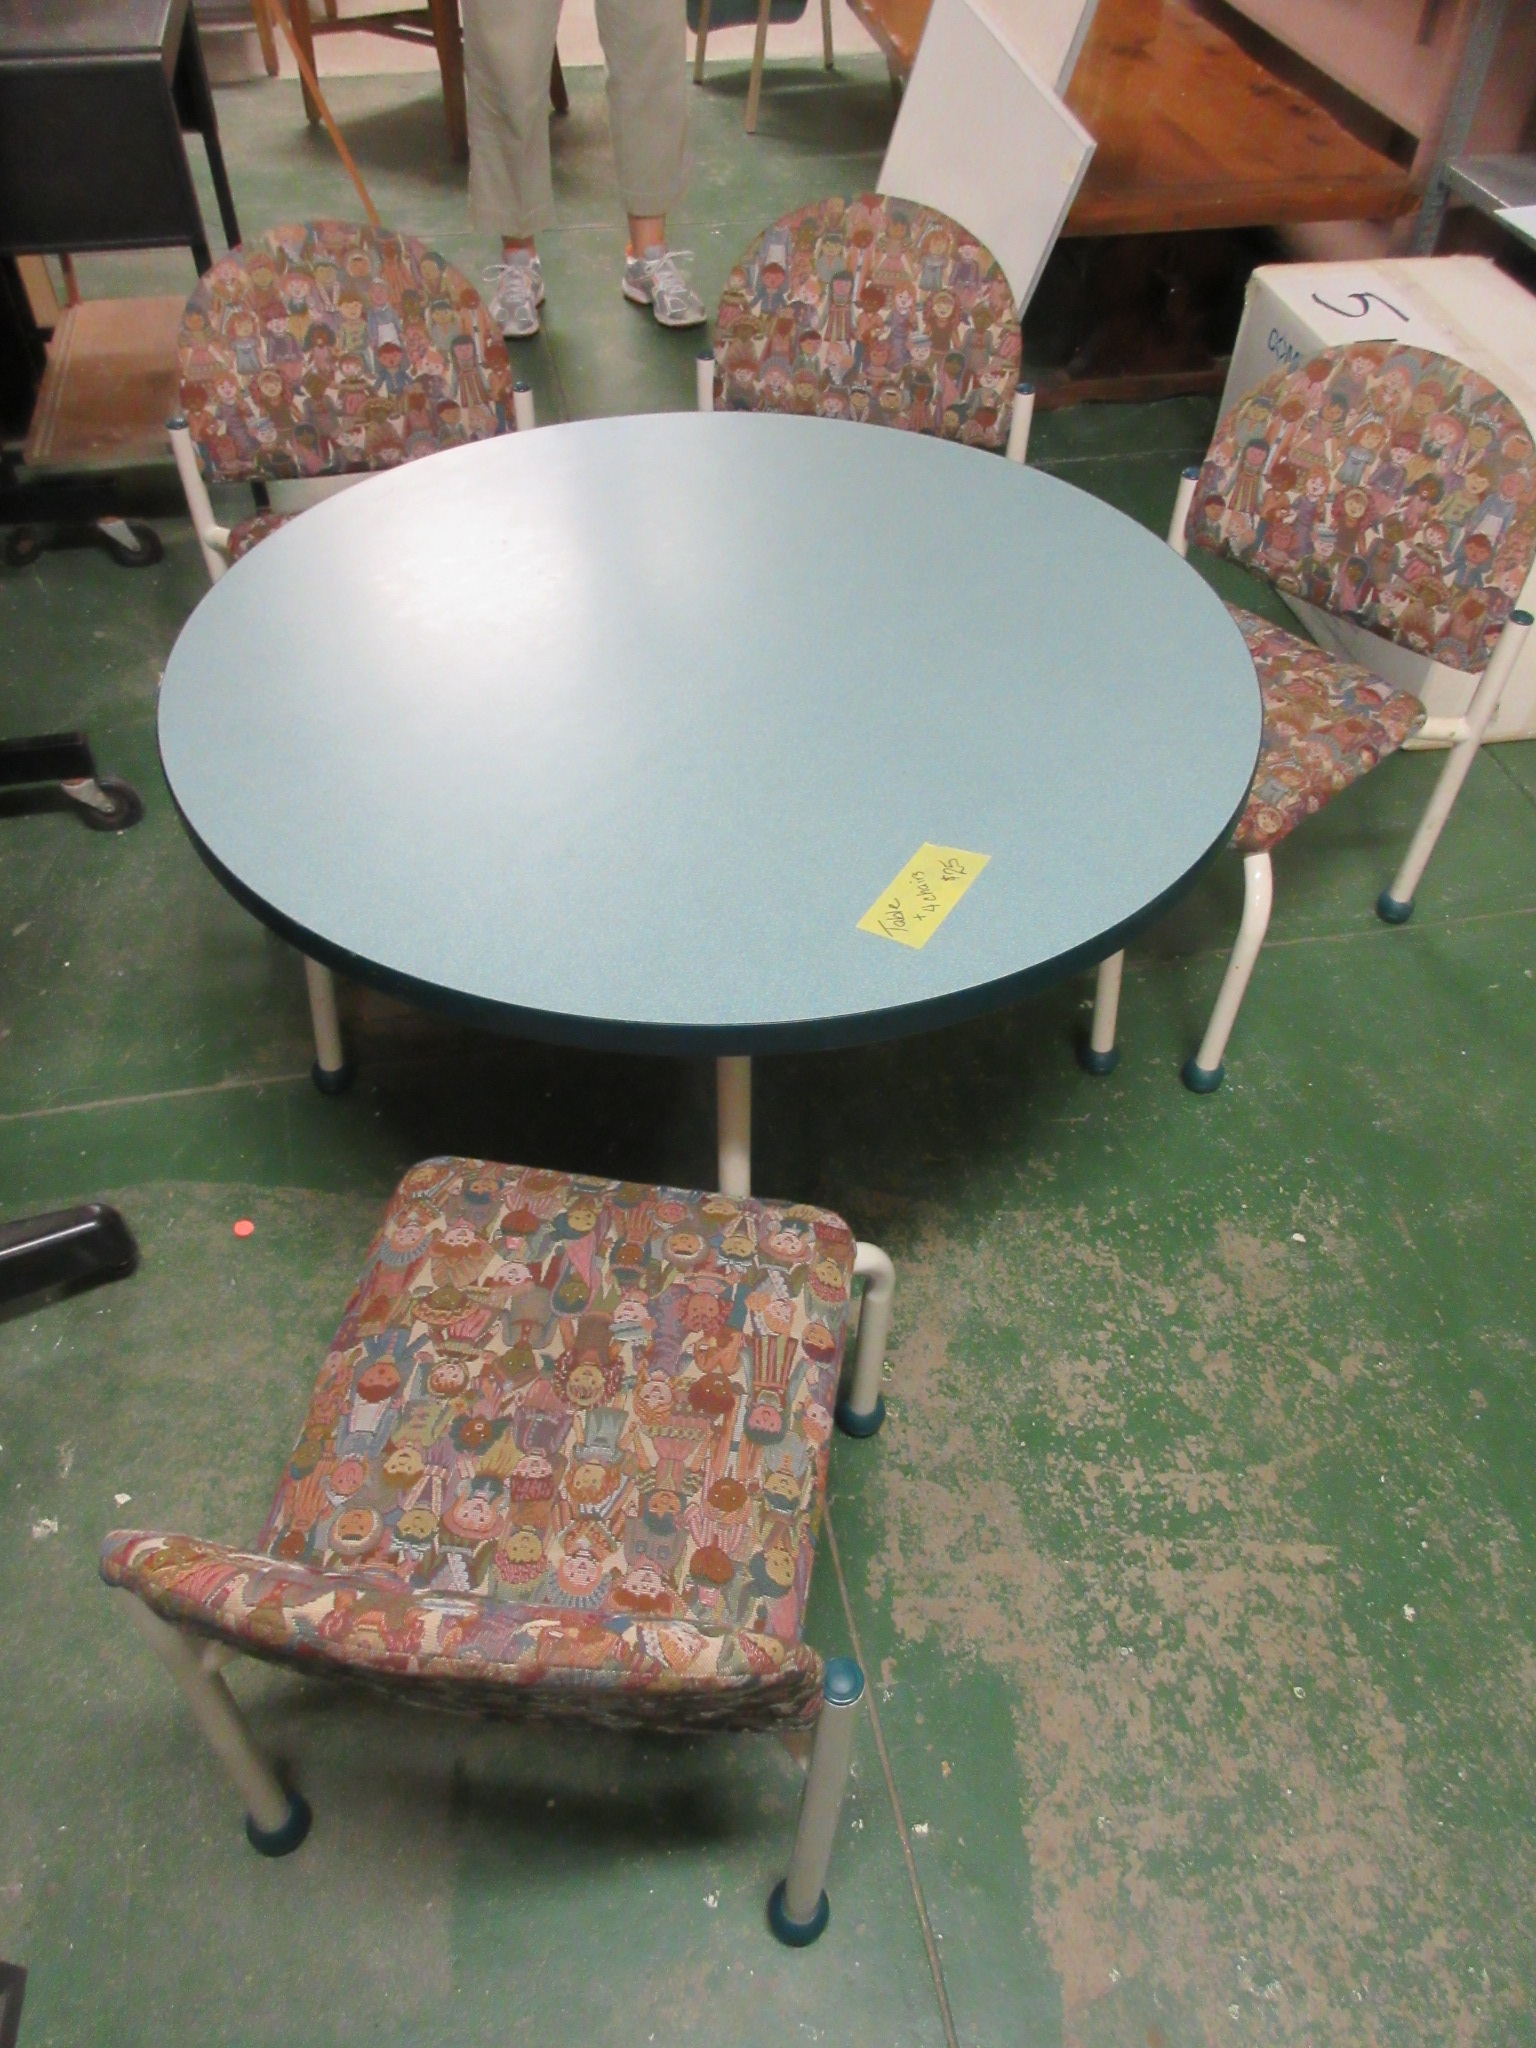 childrens table and chairs.JPG